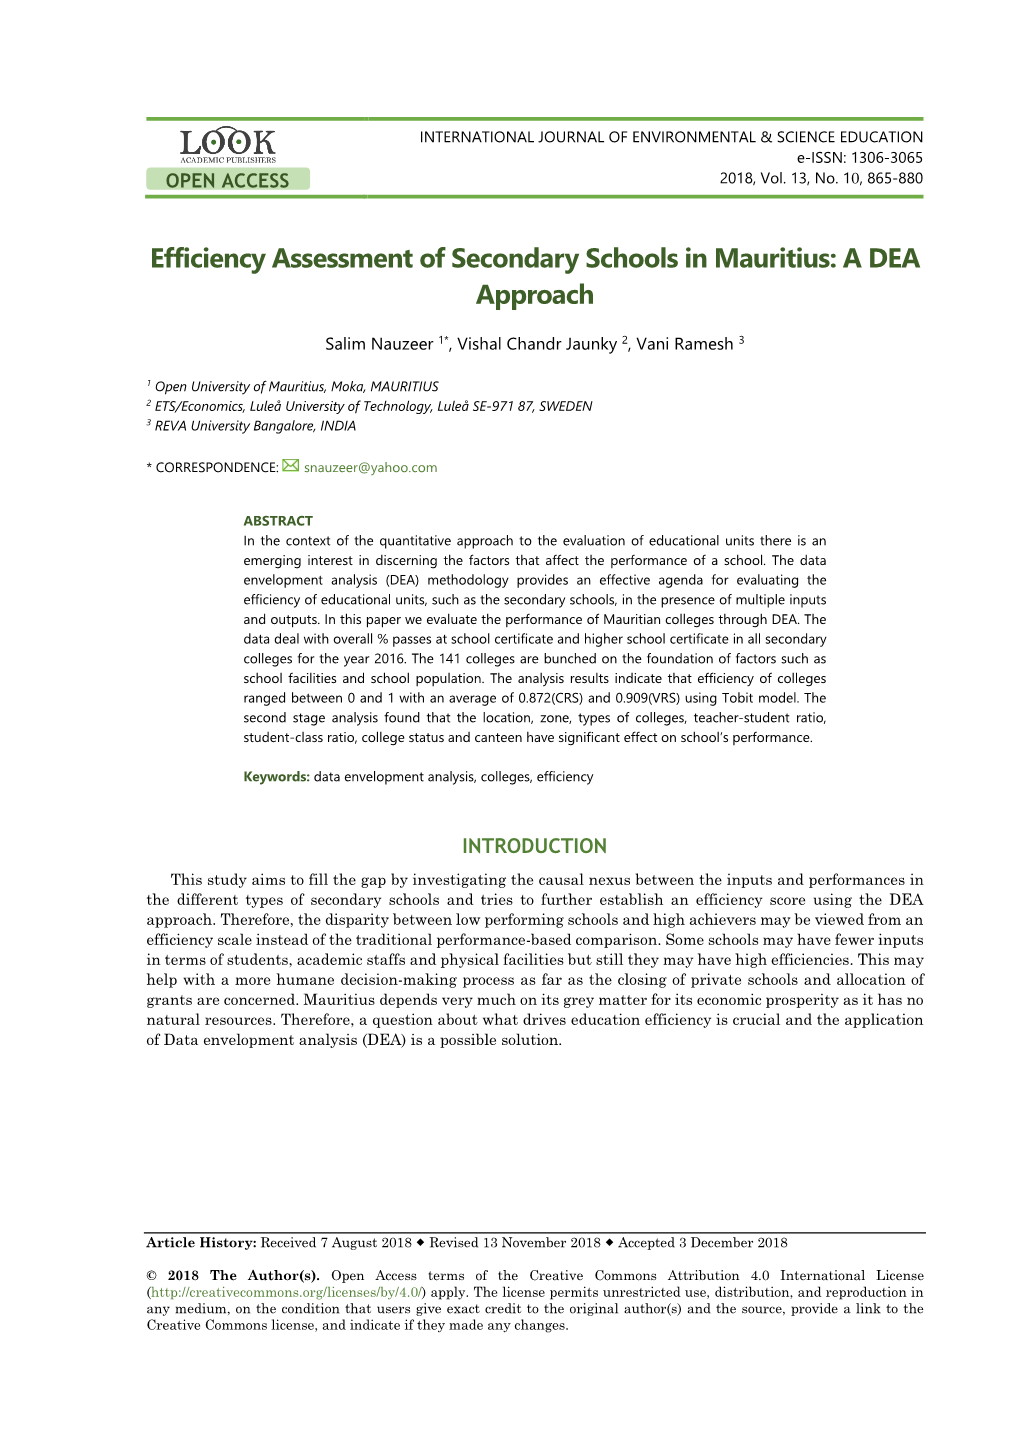 Efficiency Assessment of Secondary Schools in Mauritius: a DEA Approach